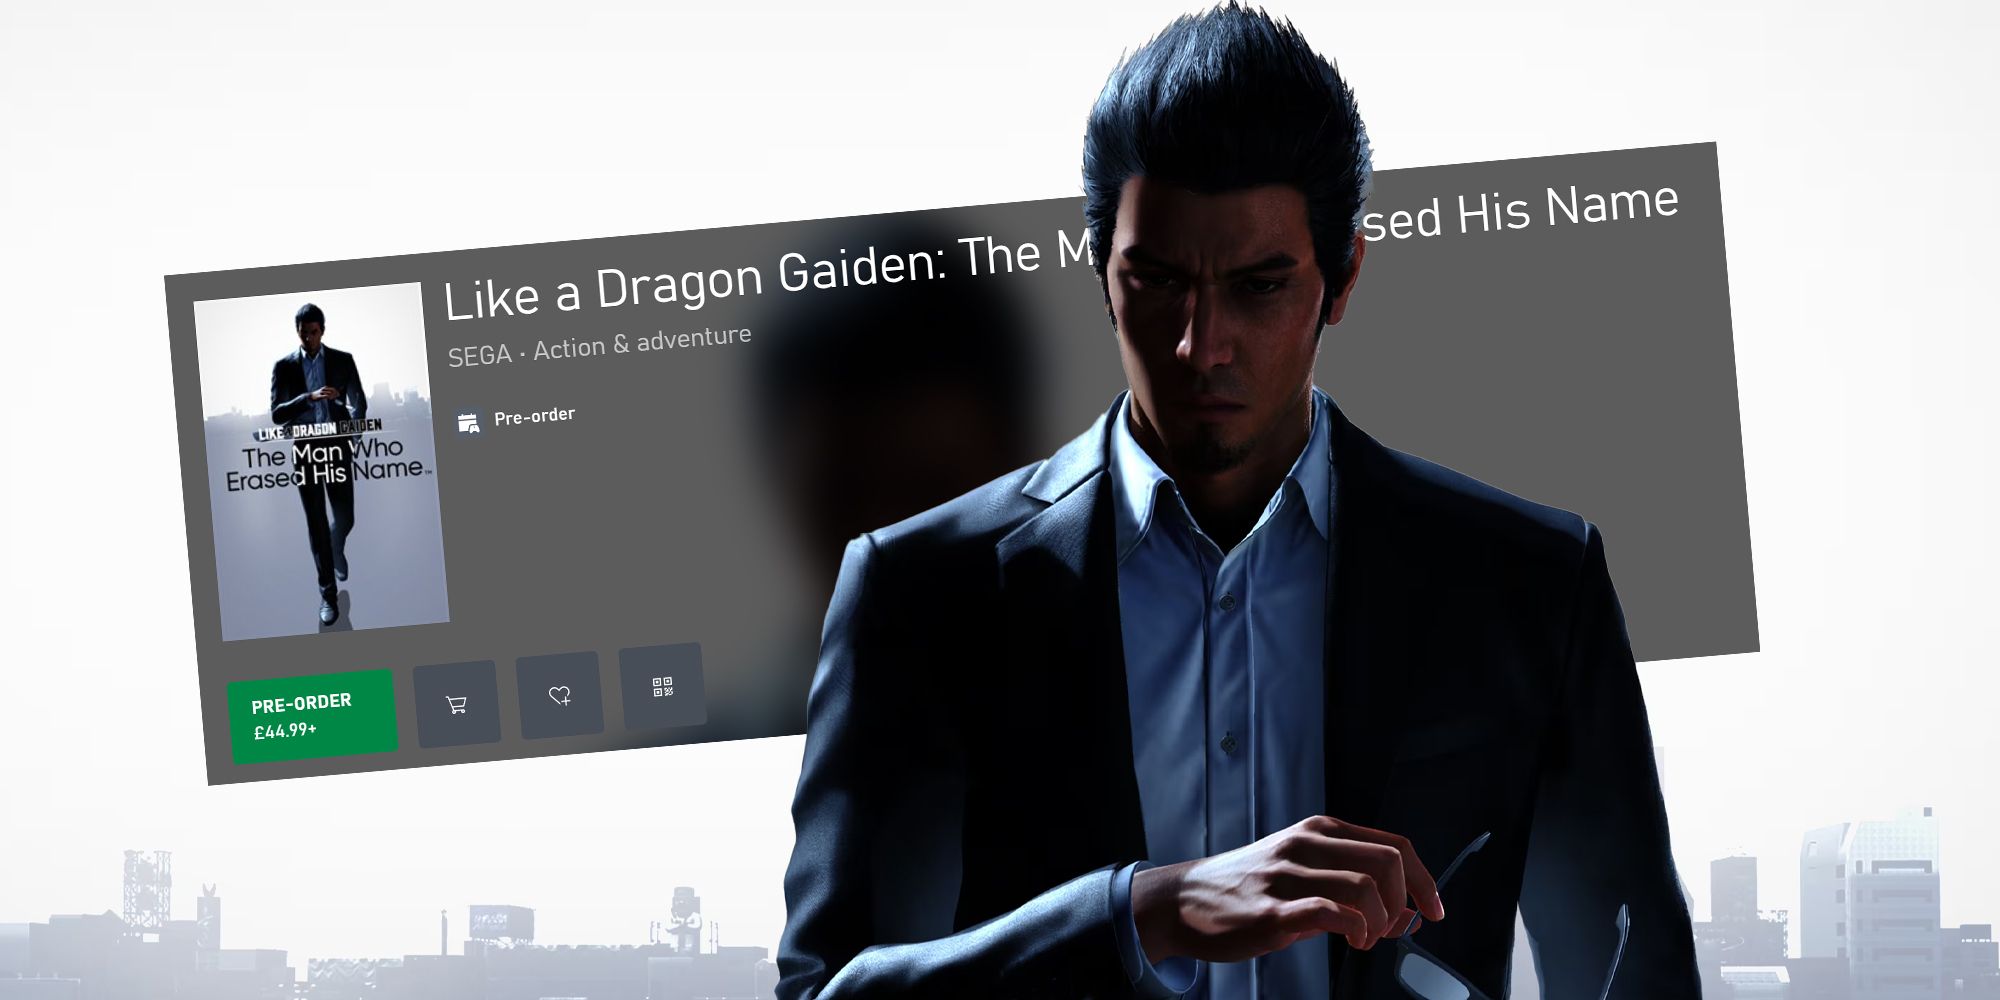 Like a Dragon Gaiden: The Man Who Erased His Name on Steam